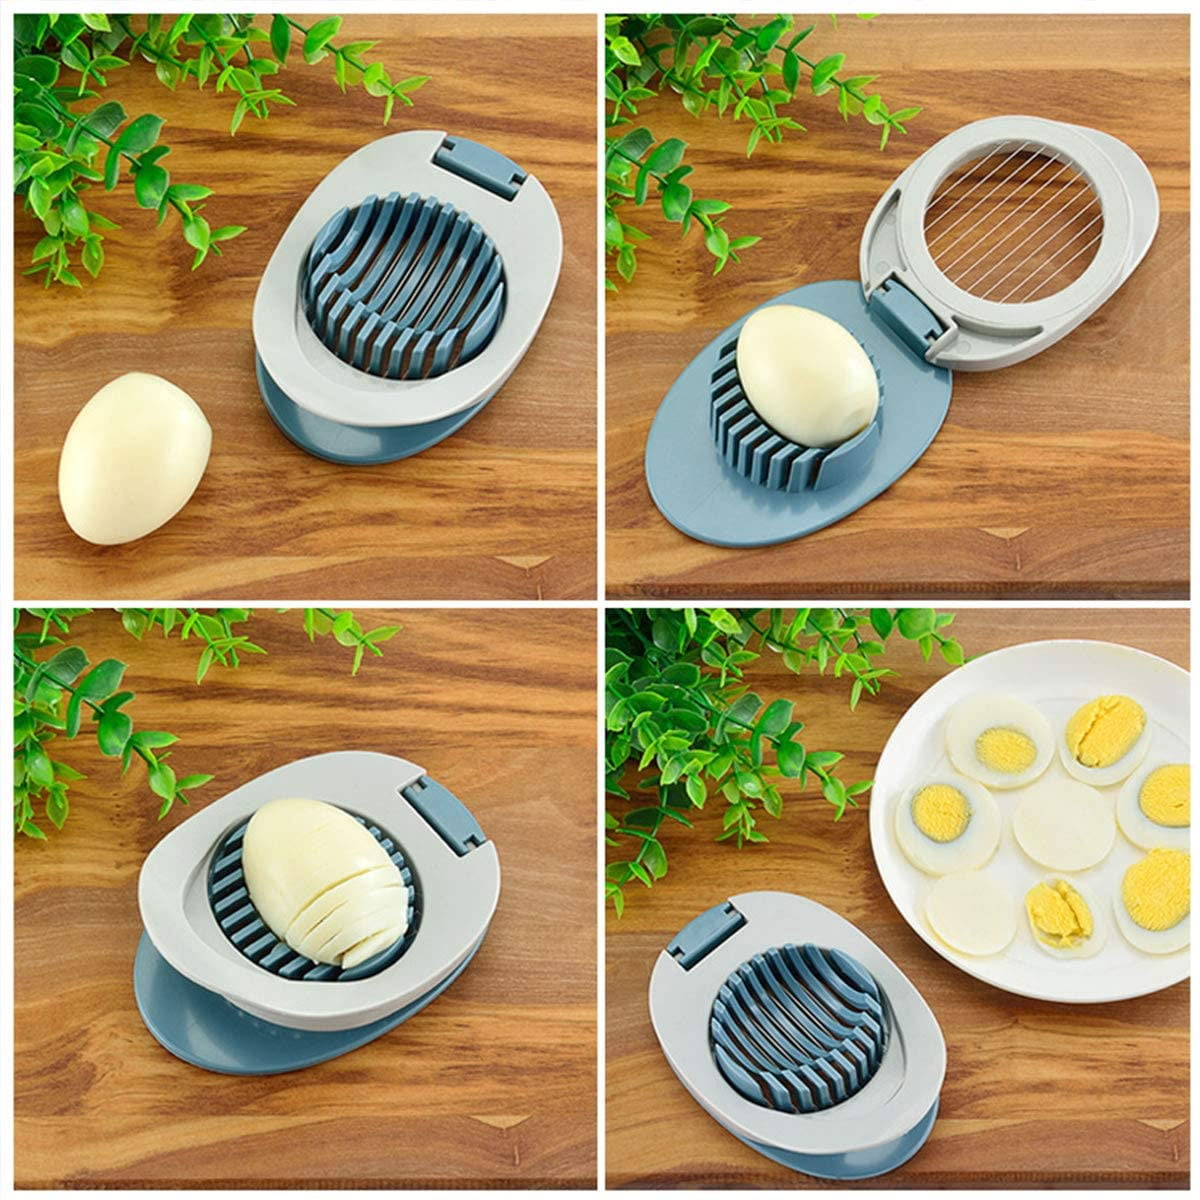 1 Pcs Stainless Steel Egg Slicer with Stainless Steel Cutting Wires Multifunctional Boiled Egg Soft Food Slicer,Stainless Steel Boiled Egg Ham